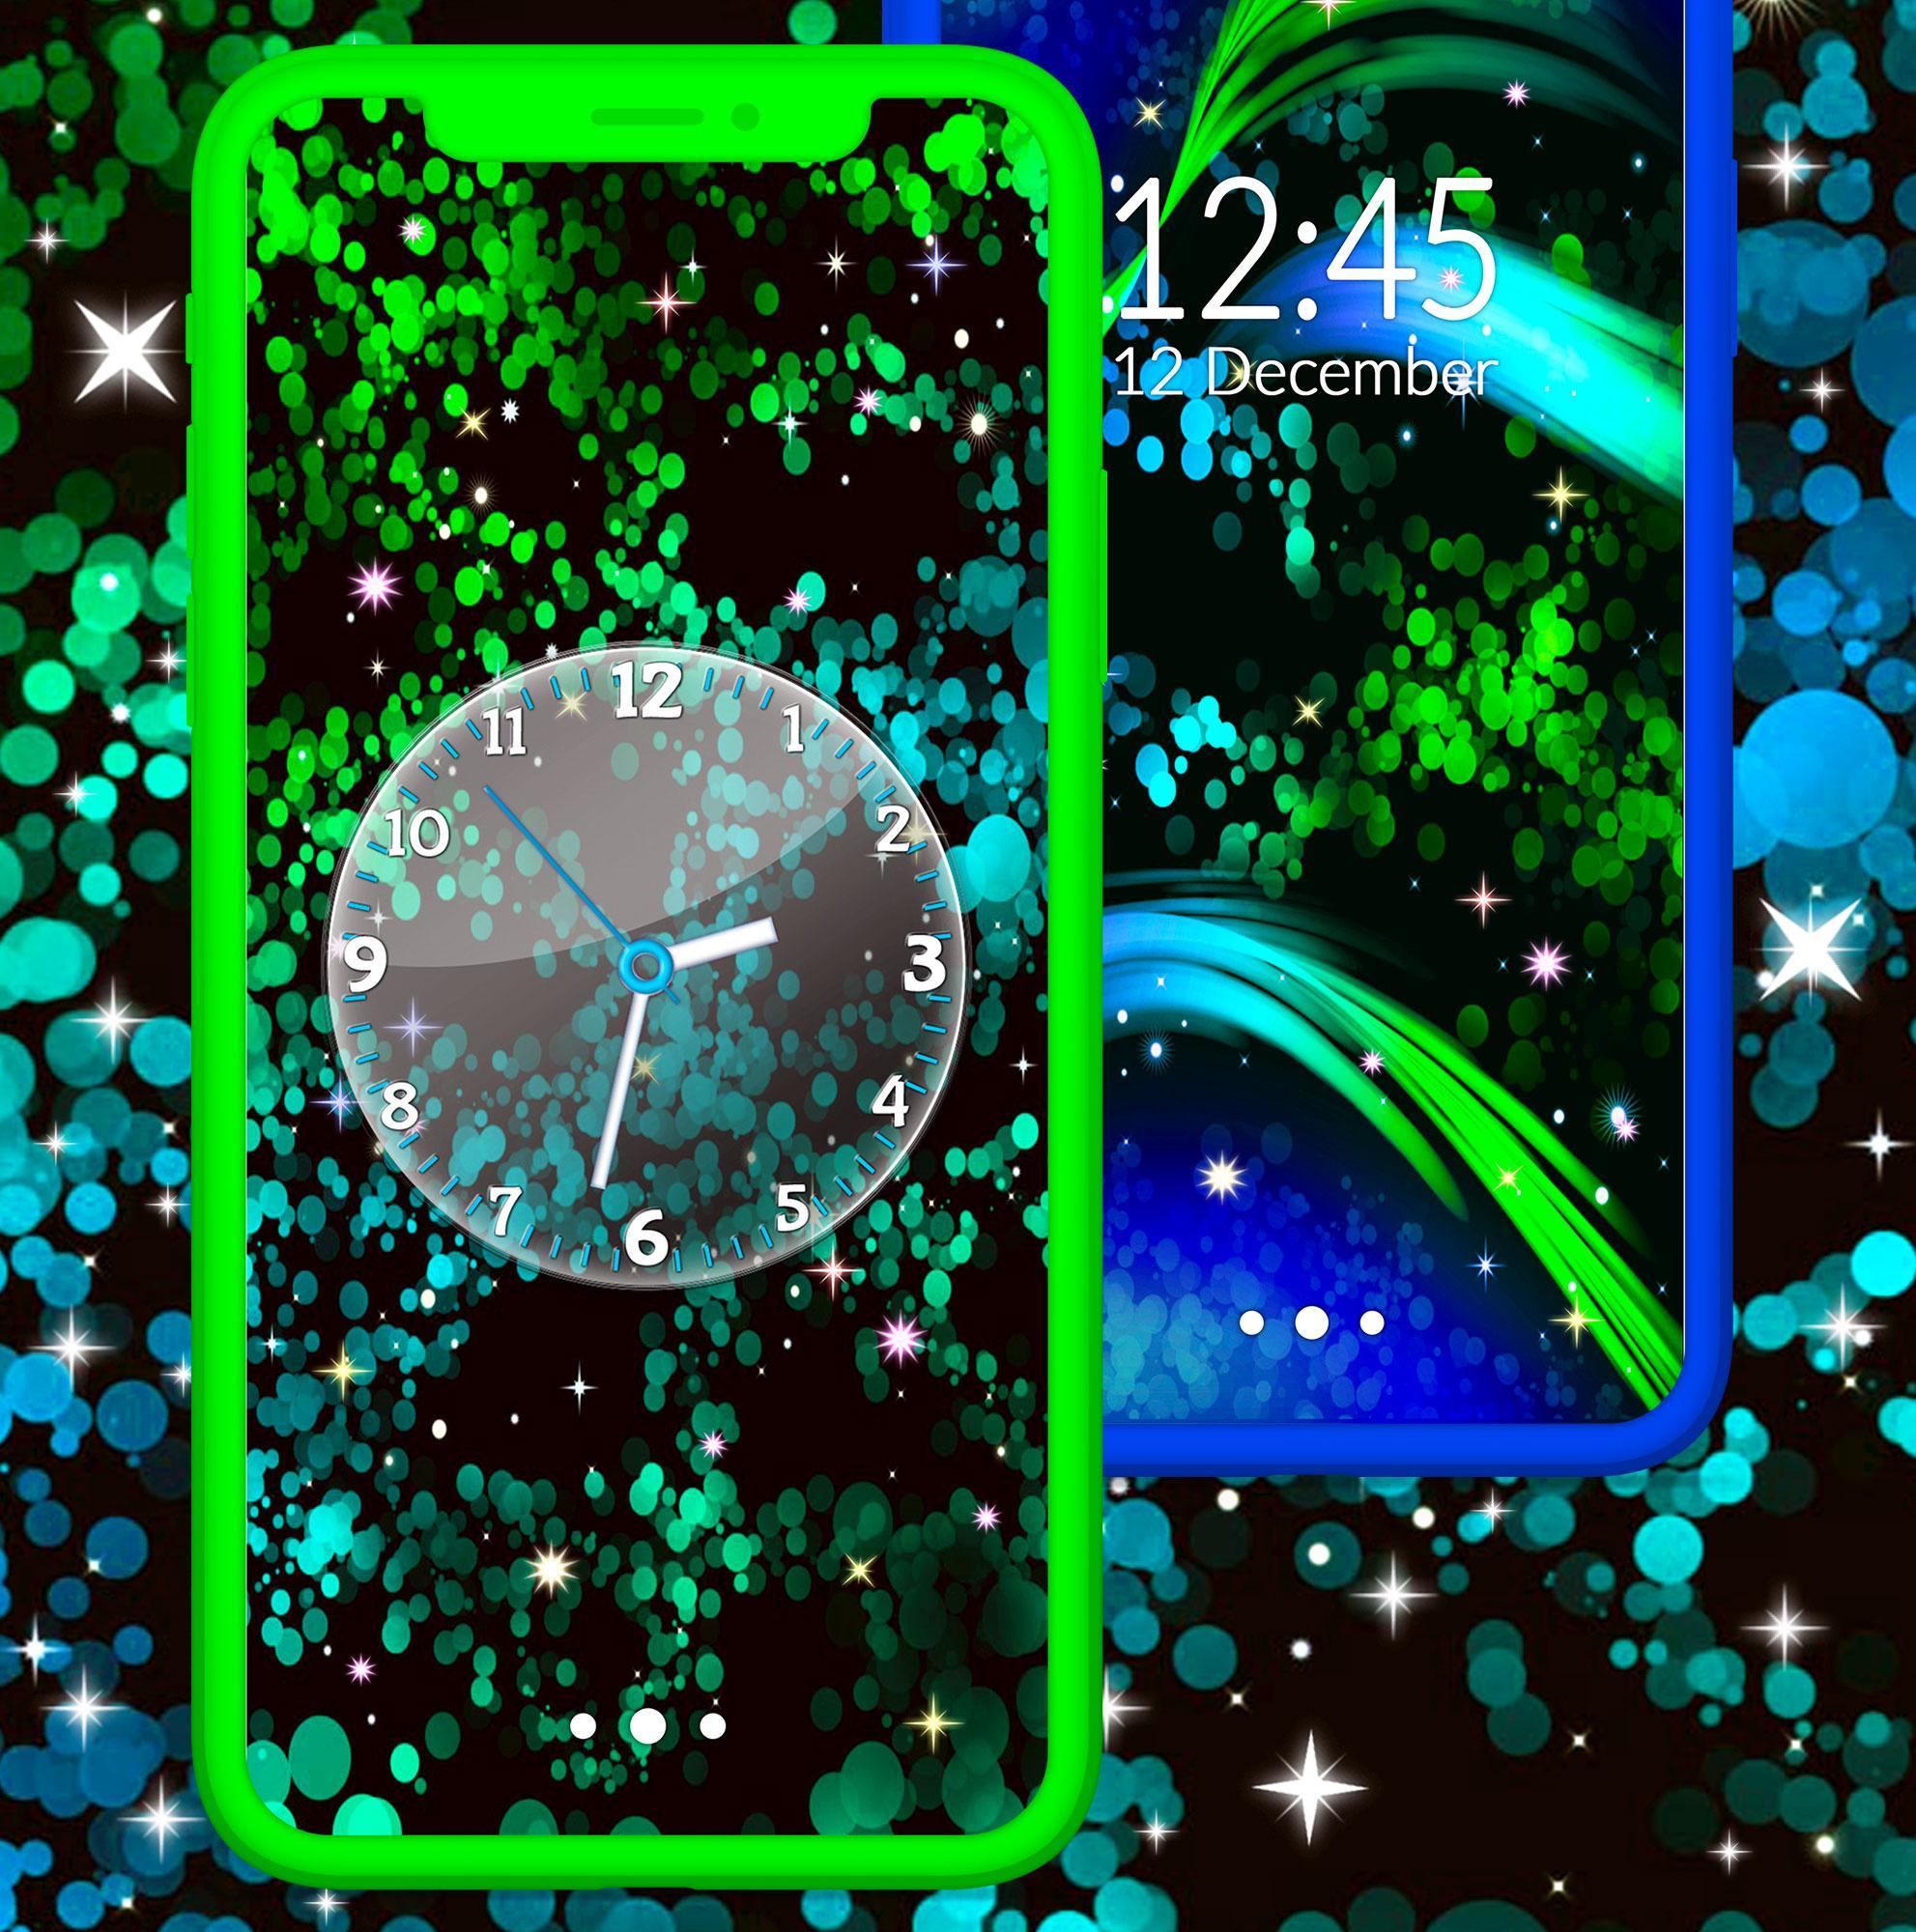 Free Live Wallpaper for Xperia ❤️ Best Wallpapers 6.7.7 Screenshot 3